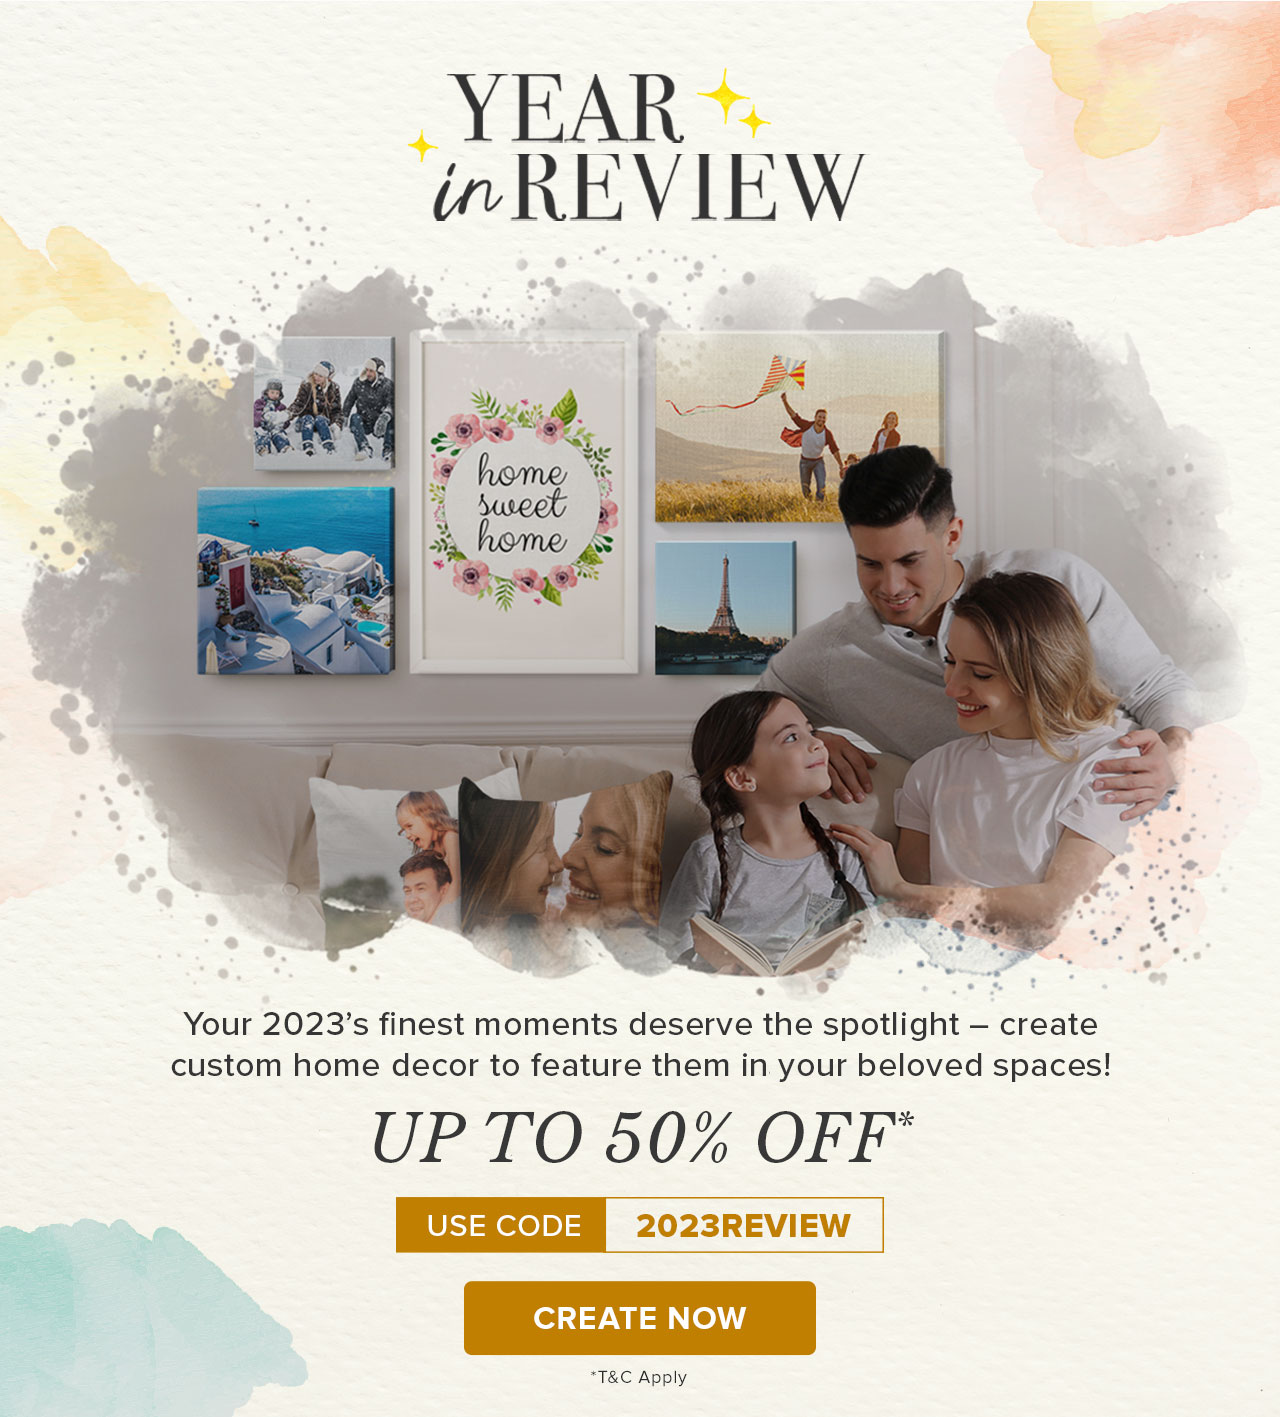 Year in Review | Create Now | Up to 50% OFF